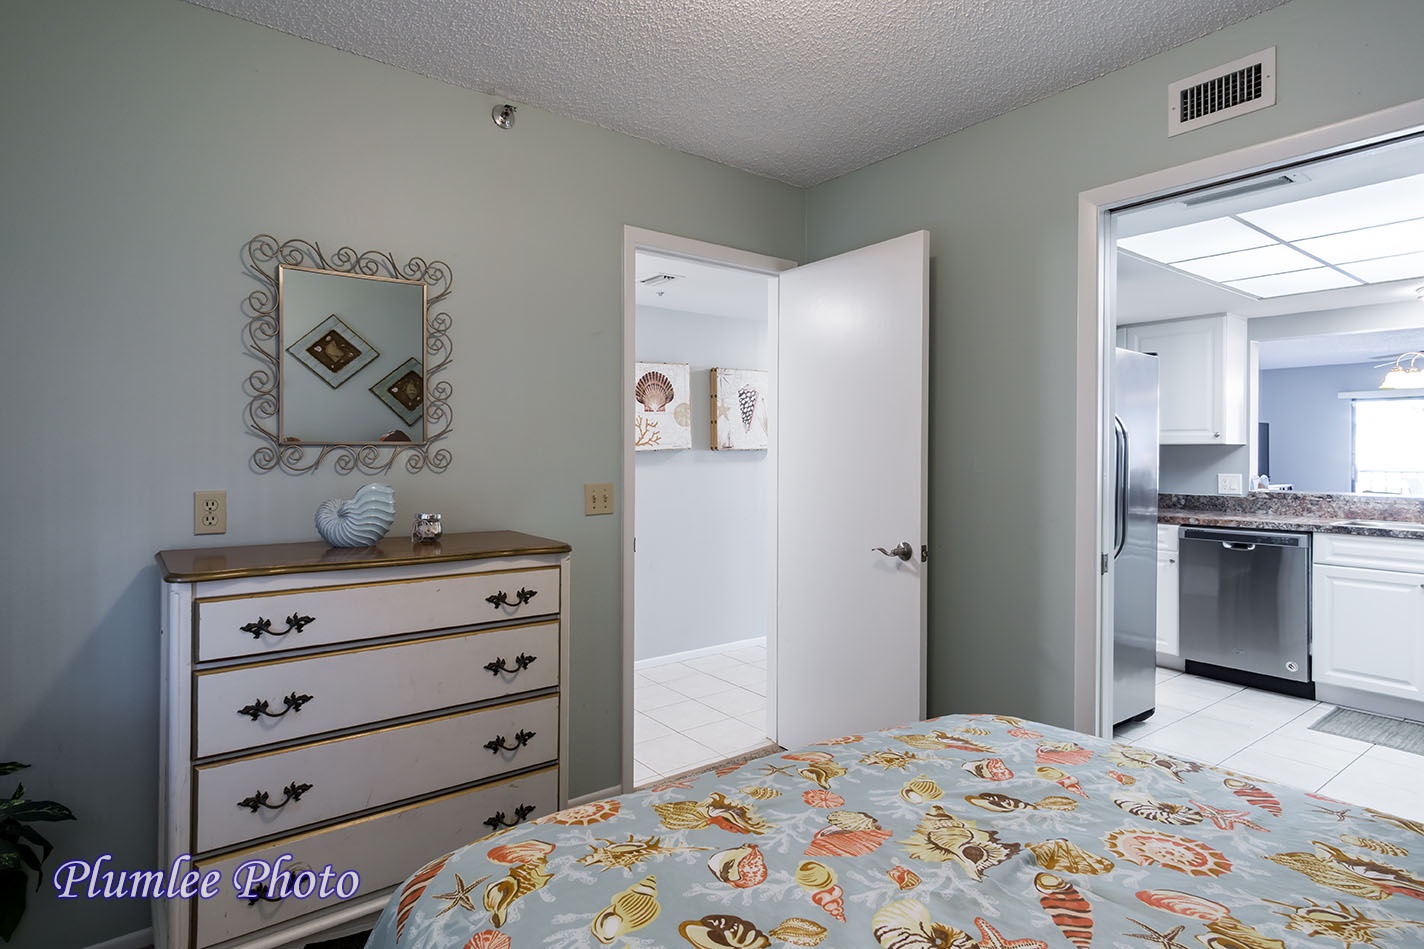 The Third Bedroom has two doors, one opens to the kitchen, easy to sneak a midnight snack!